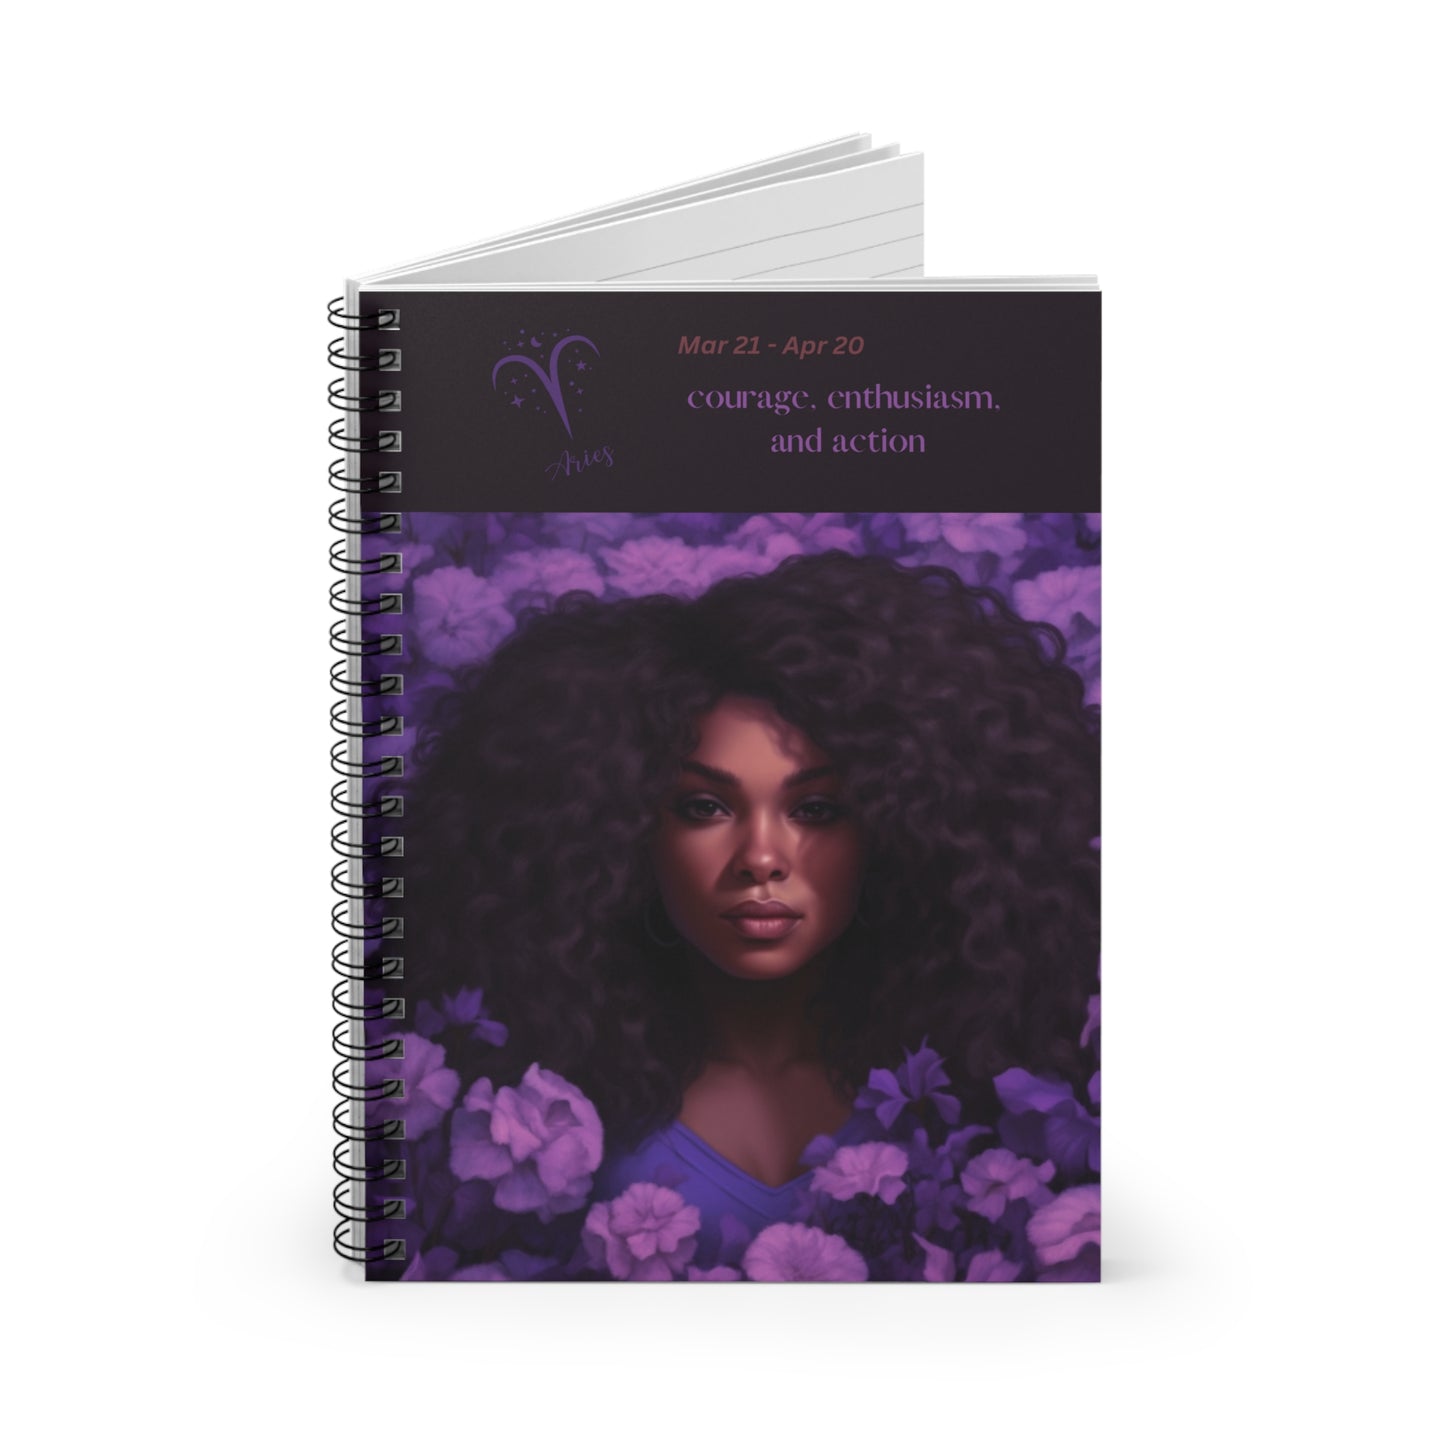 Astrology Collection (Aries - Purple) - AA Culture Journal - Ruled Line